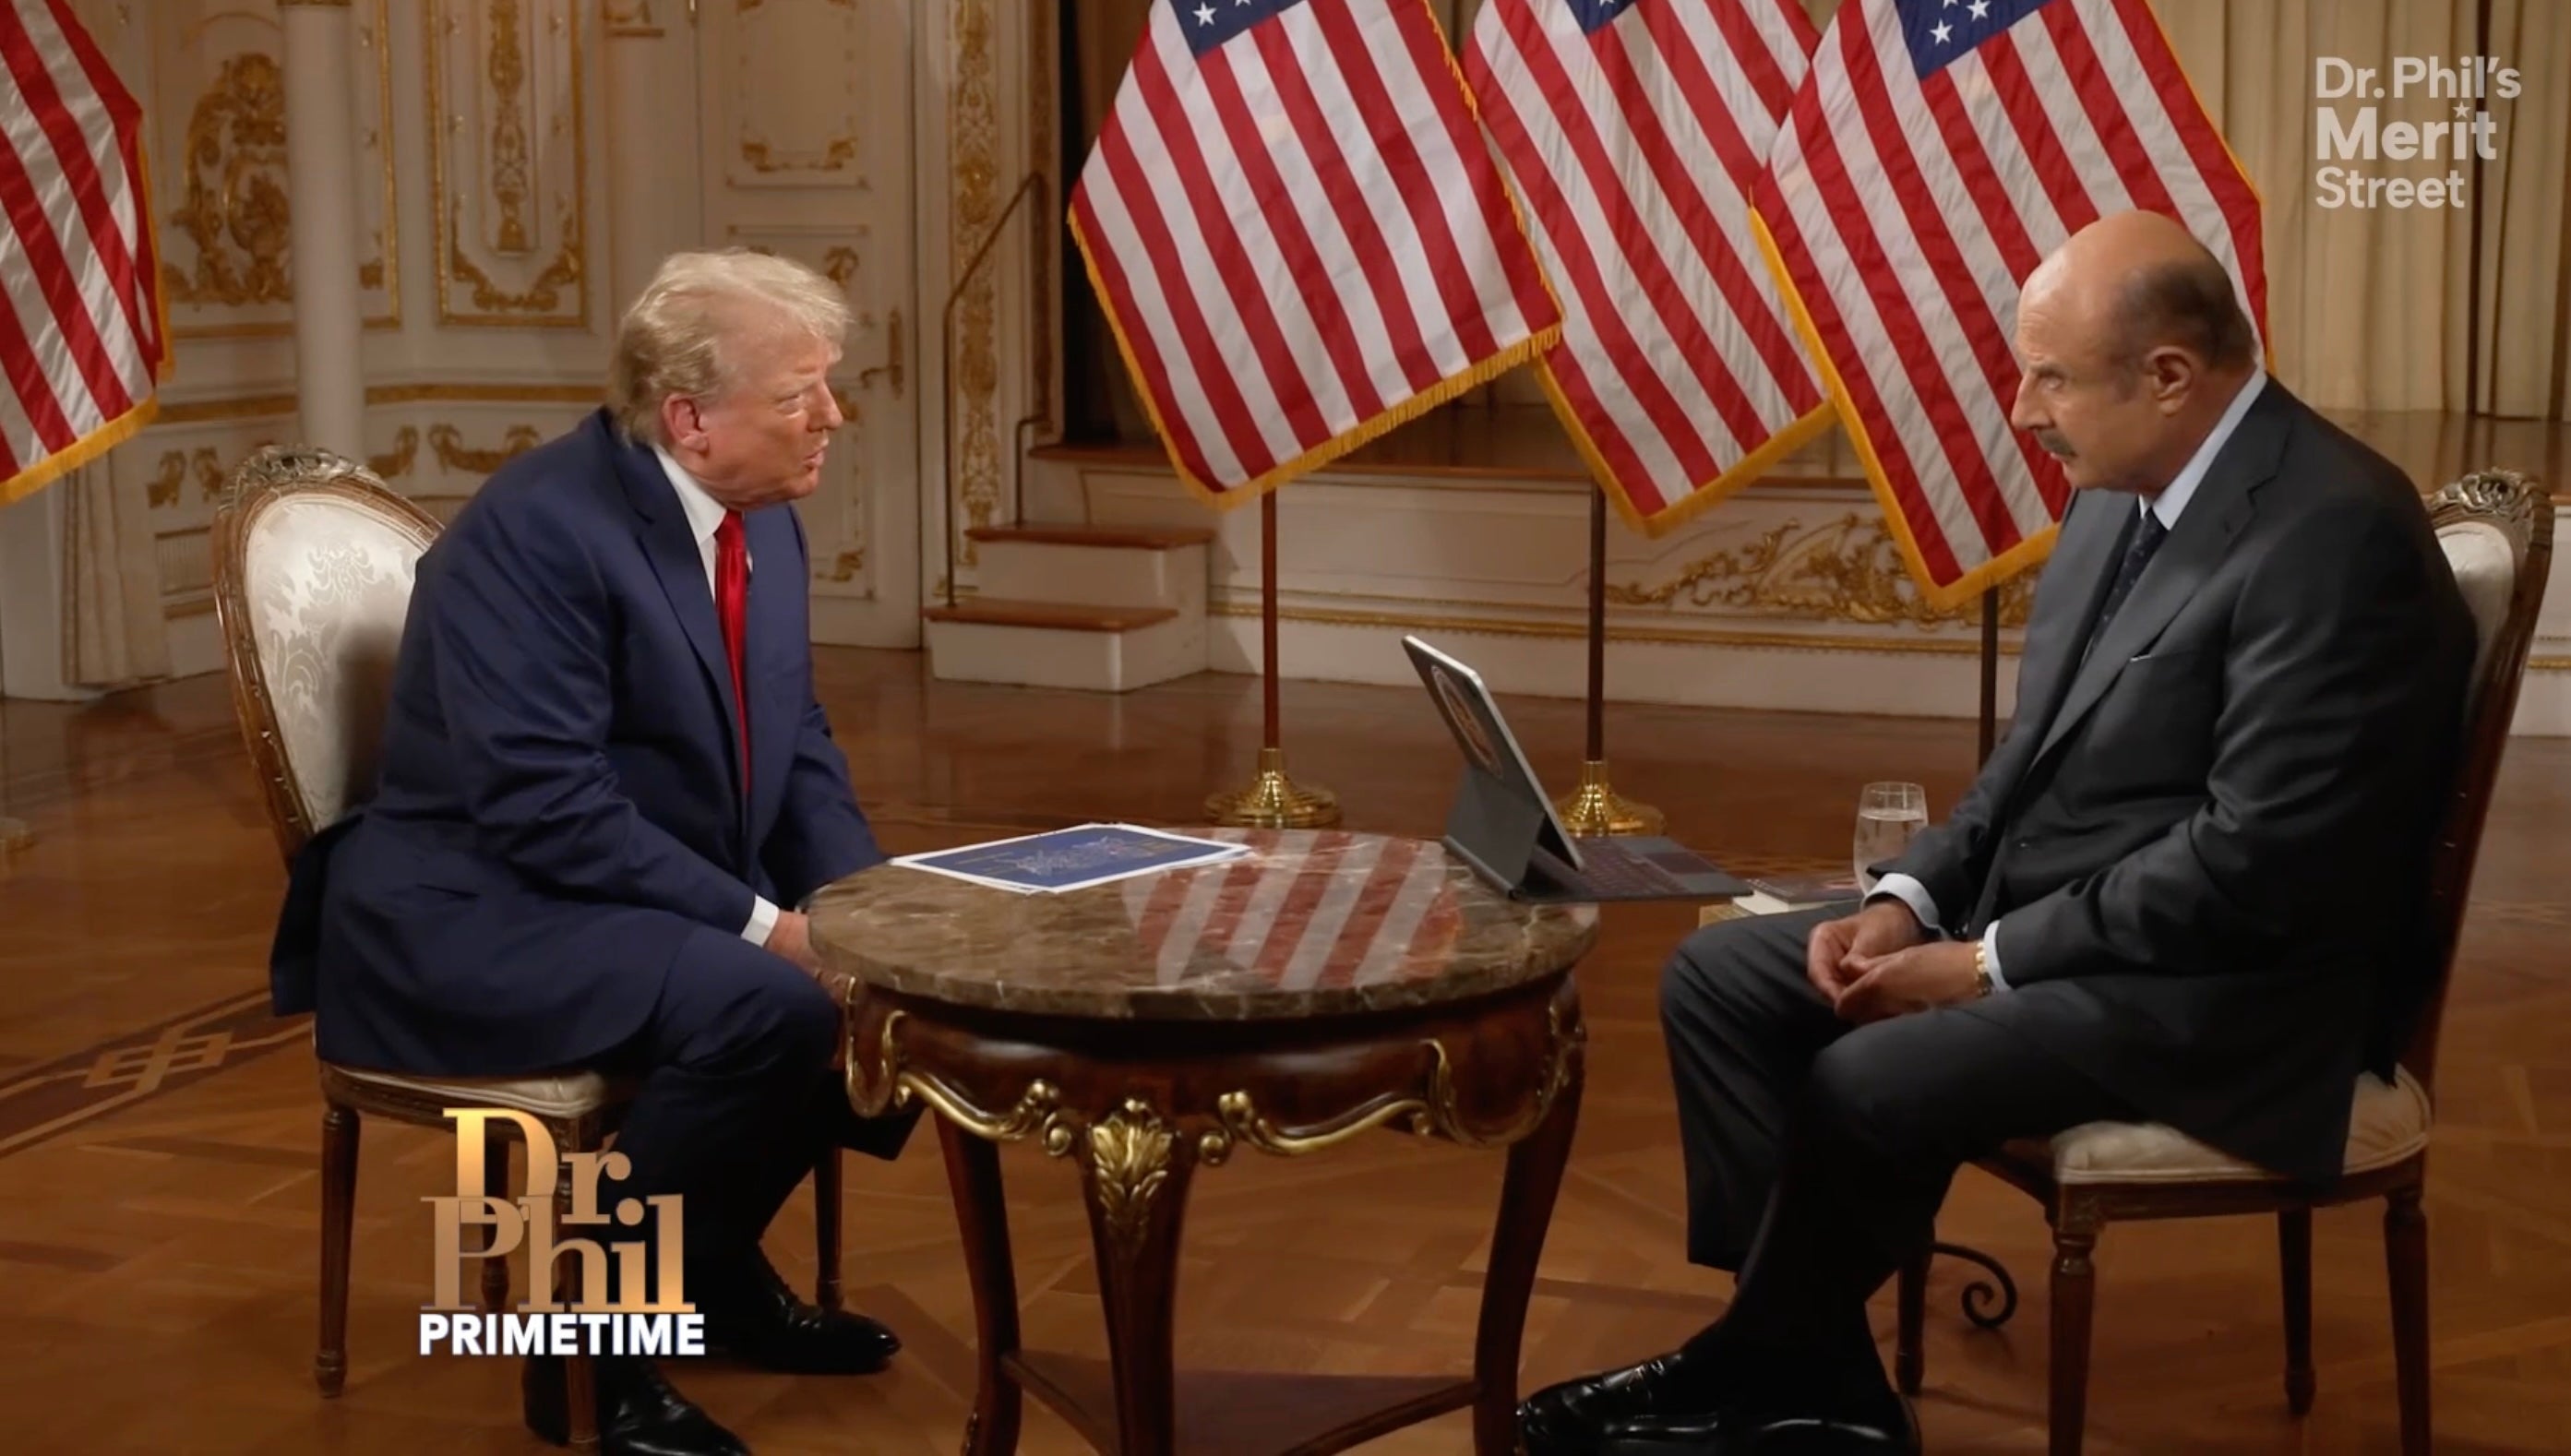 Donald Trump and Dr Phil discuss several topics, including the election and his family, during an interview on 6 June